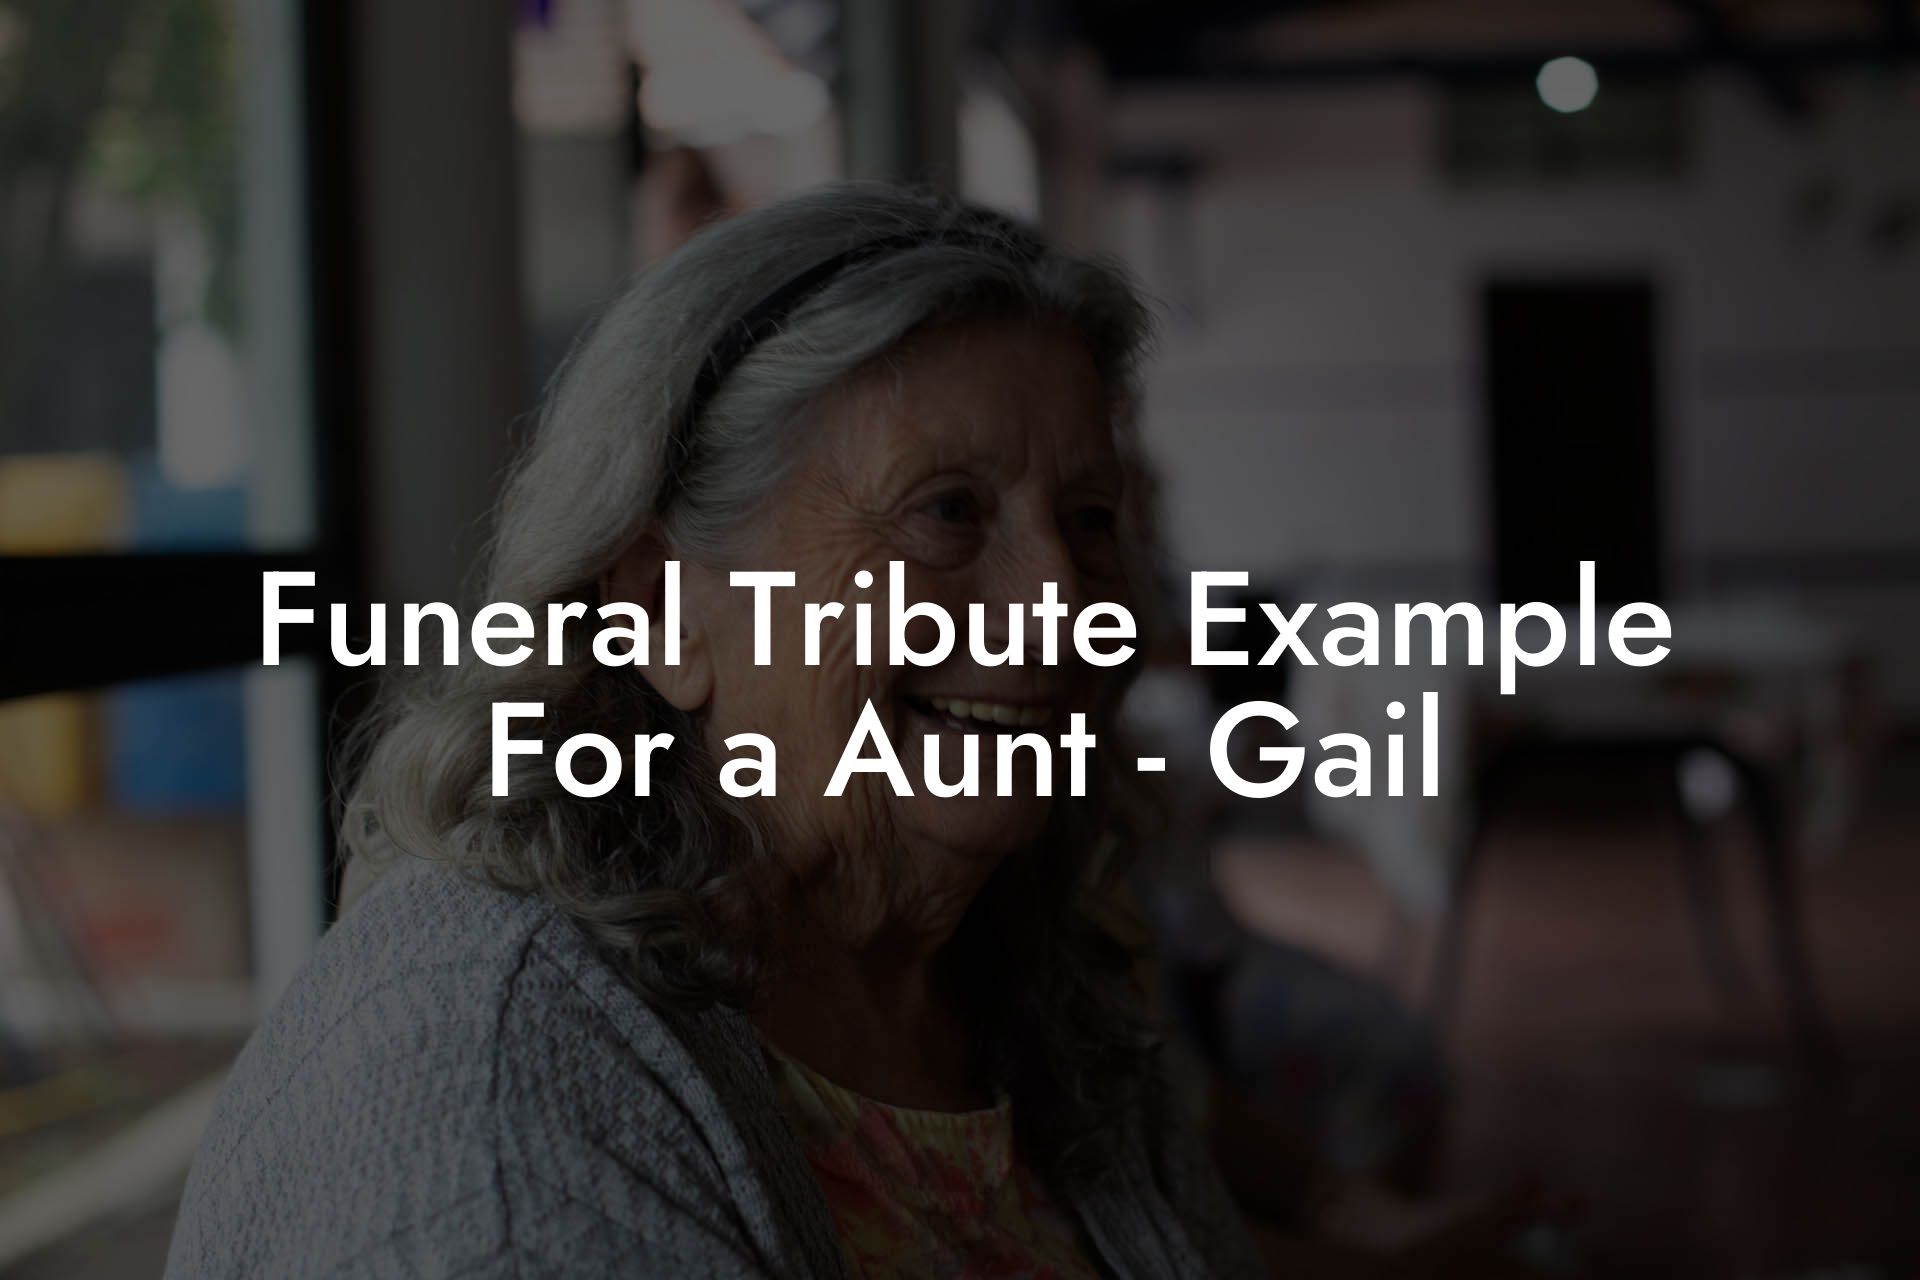 Funeral Tribute Example For a Aunt - Gail